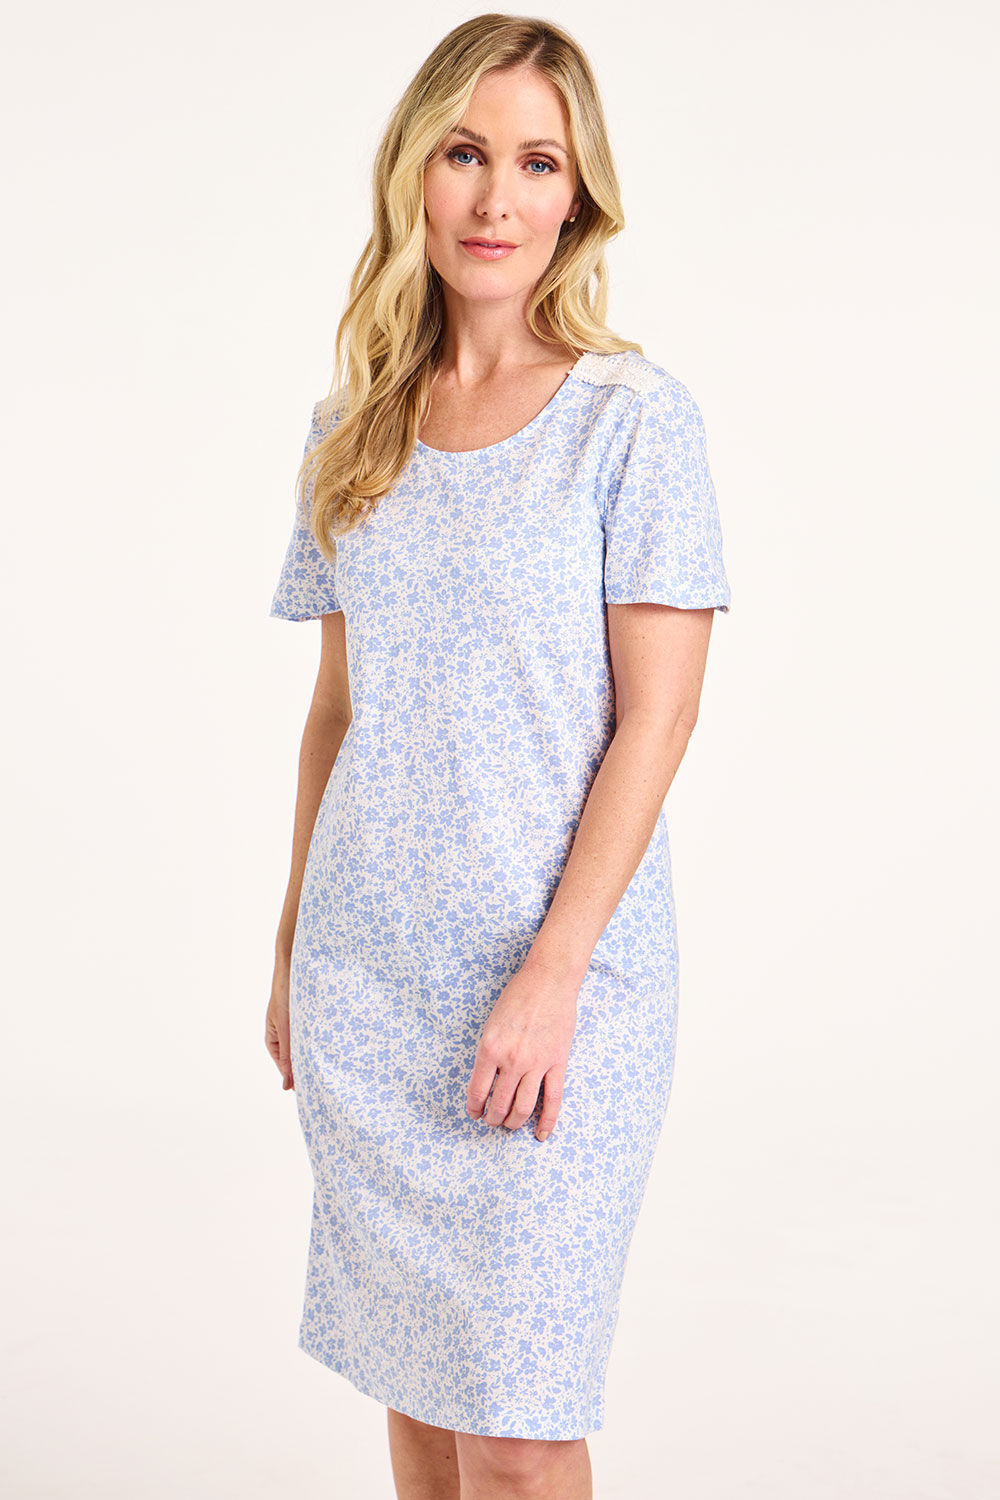 Bonmarche 100% Cotton Blue Floral Print Jersey Nightdress With Lace Trim, Size: 08-10